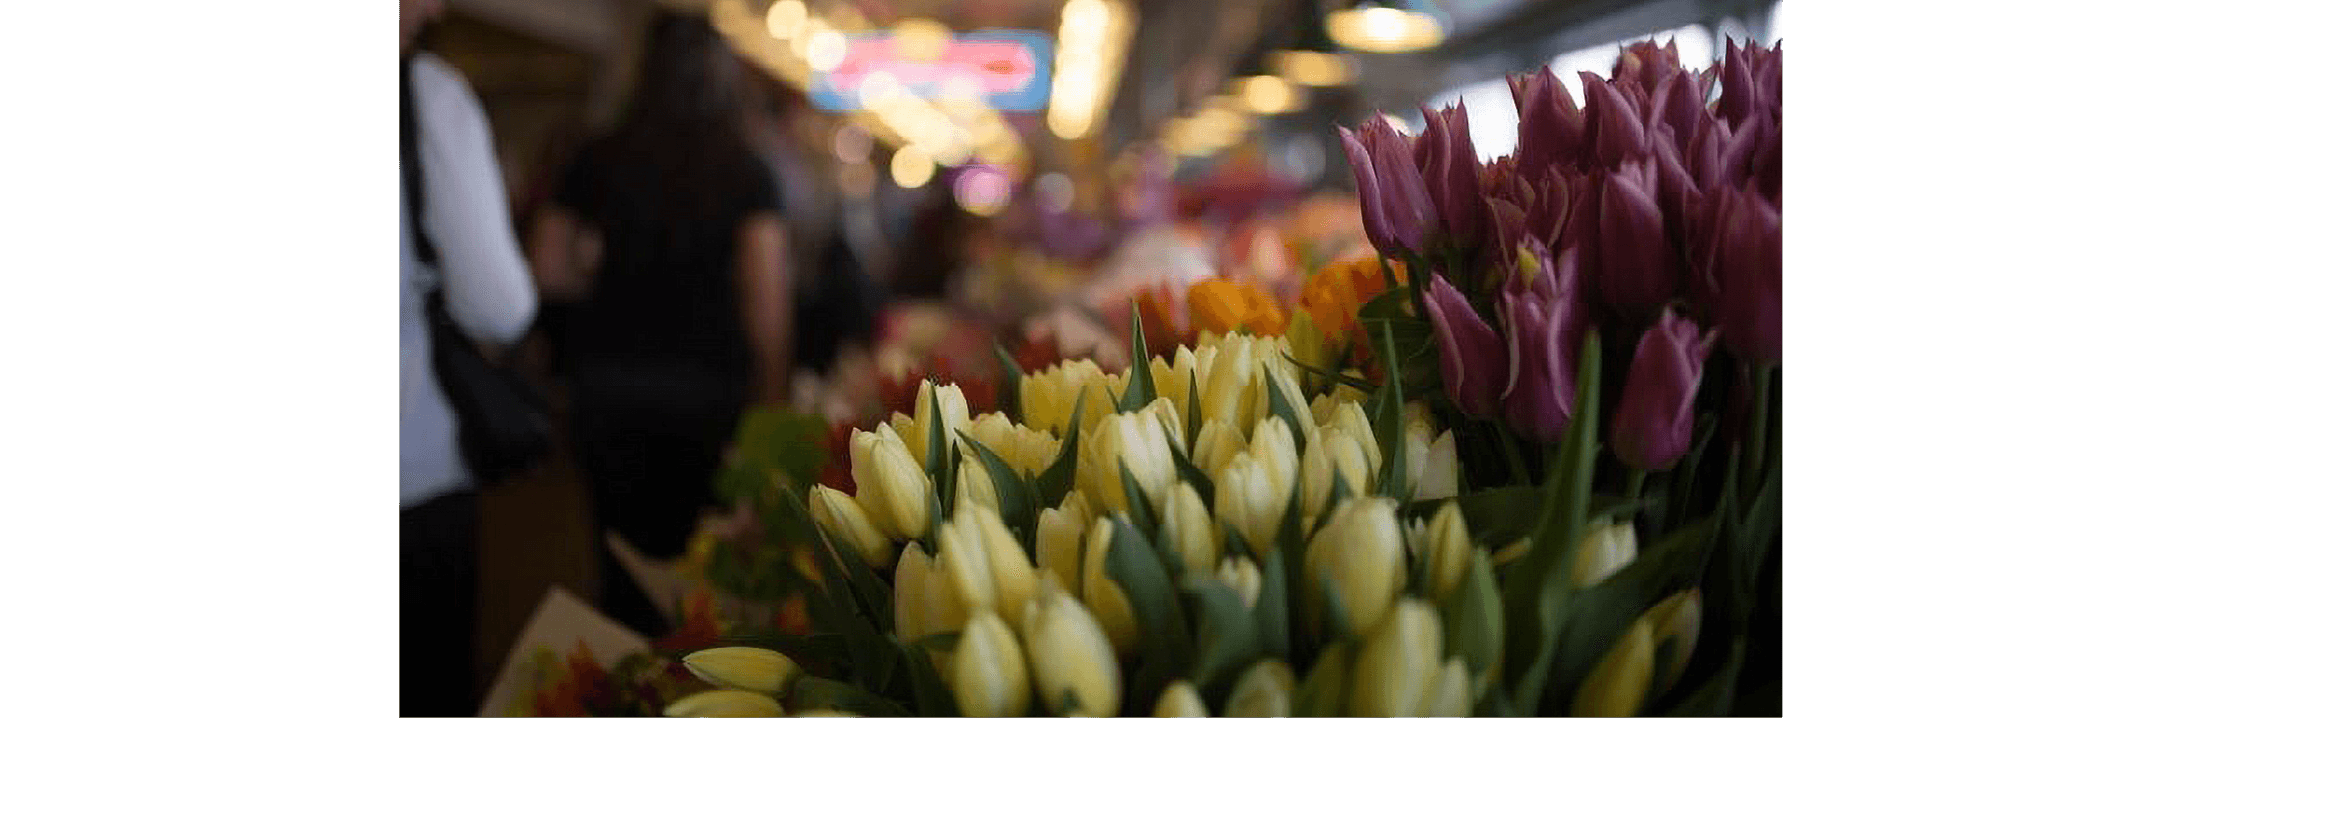 Different coloured bunches of tulips lined up in a warehouse.